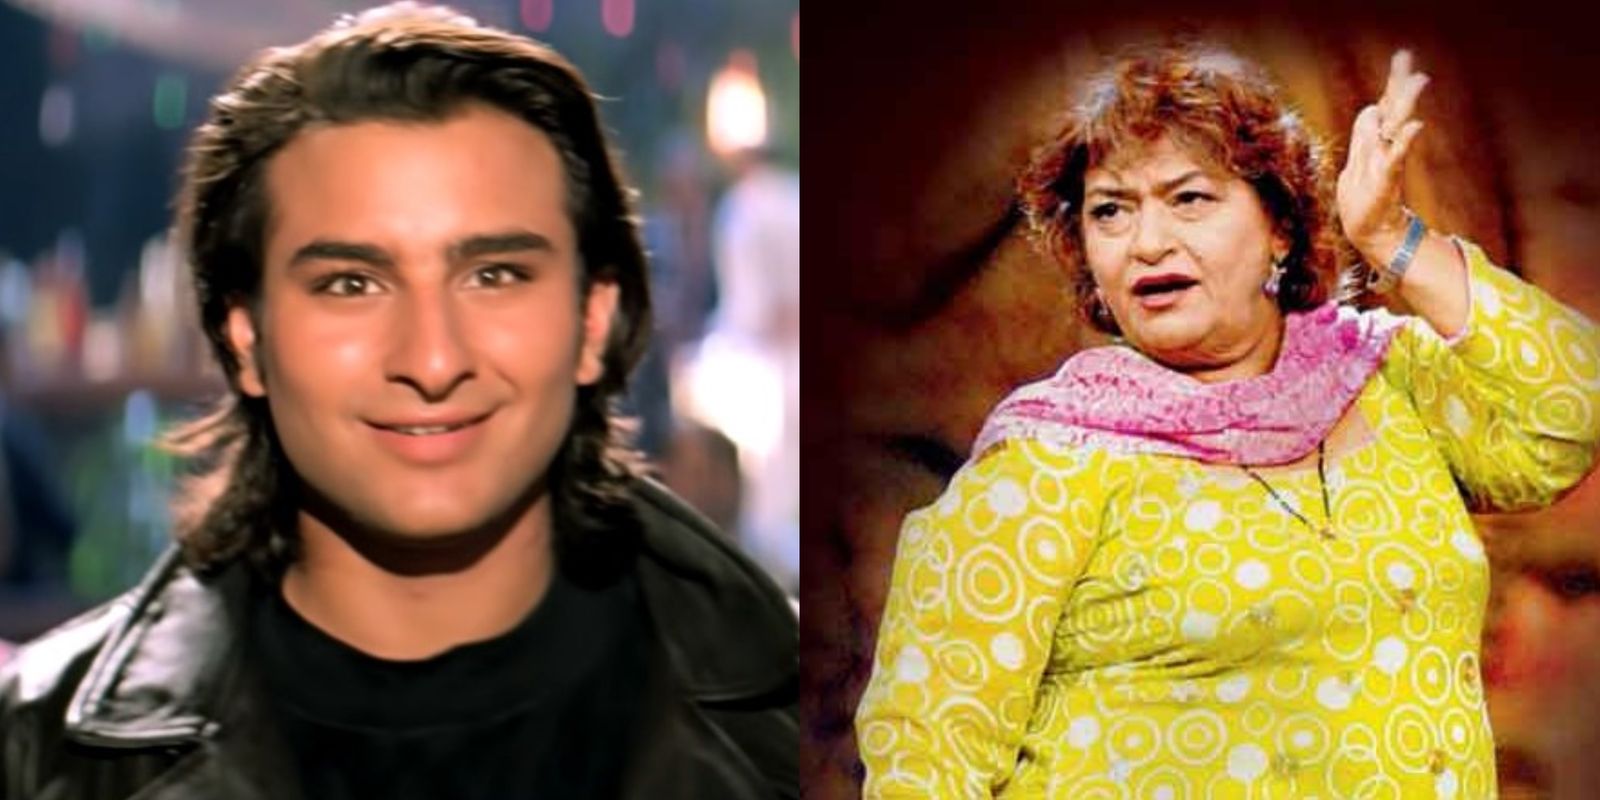 Saif Ali Khan Remembers His Ole Ole Choreographer Saroj Khan; Says ‘A Song With Her Often Became Real Art’